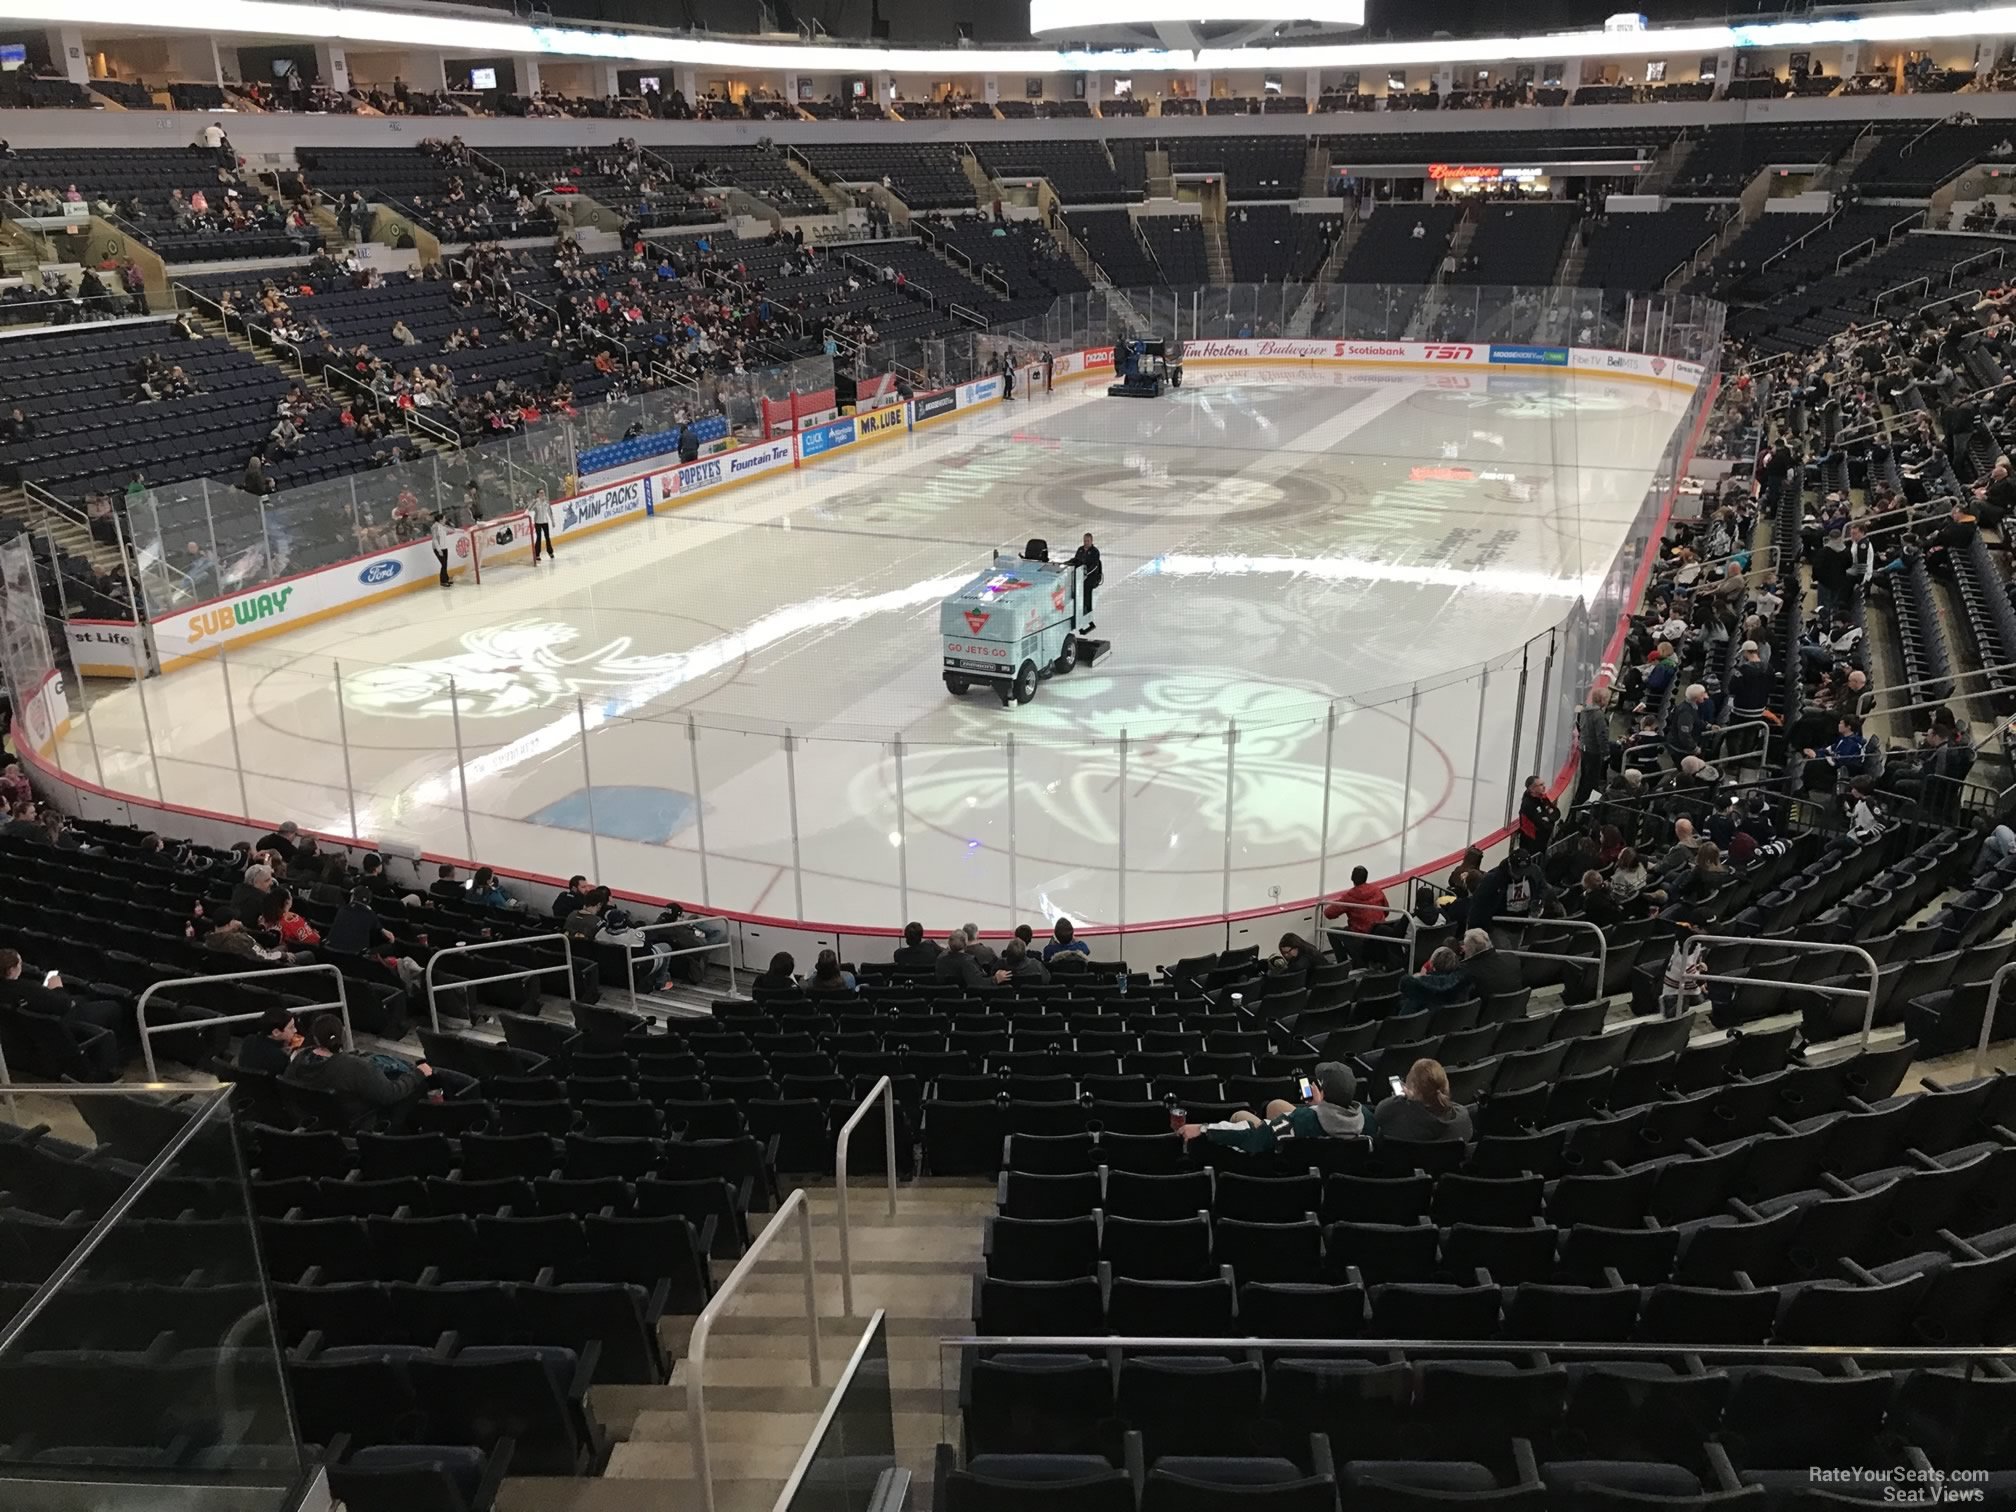 section 211, row 4 seat view  for hockey - canada life centre